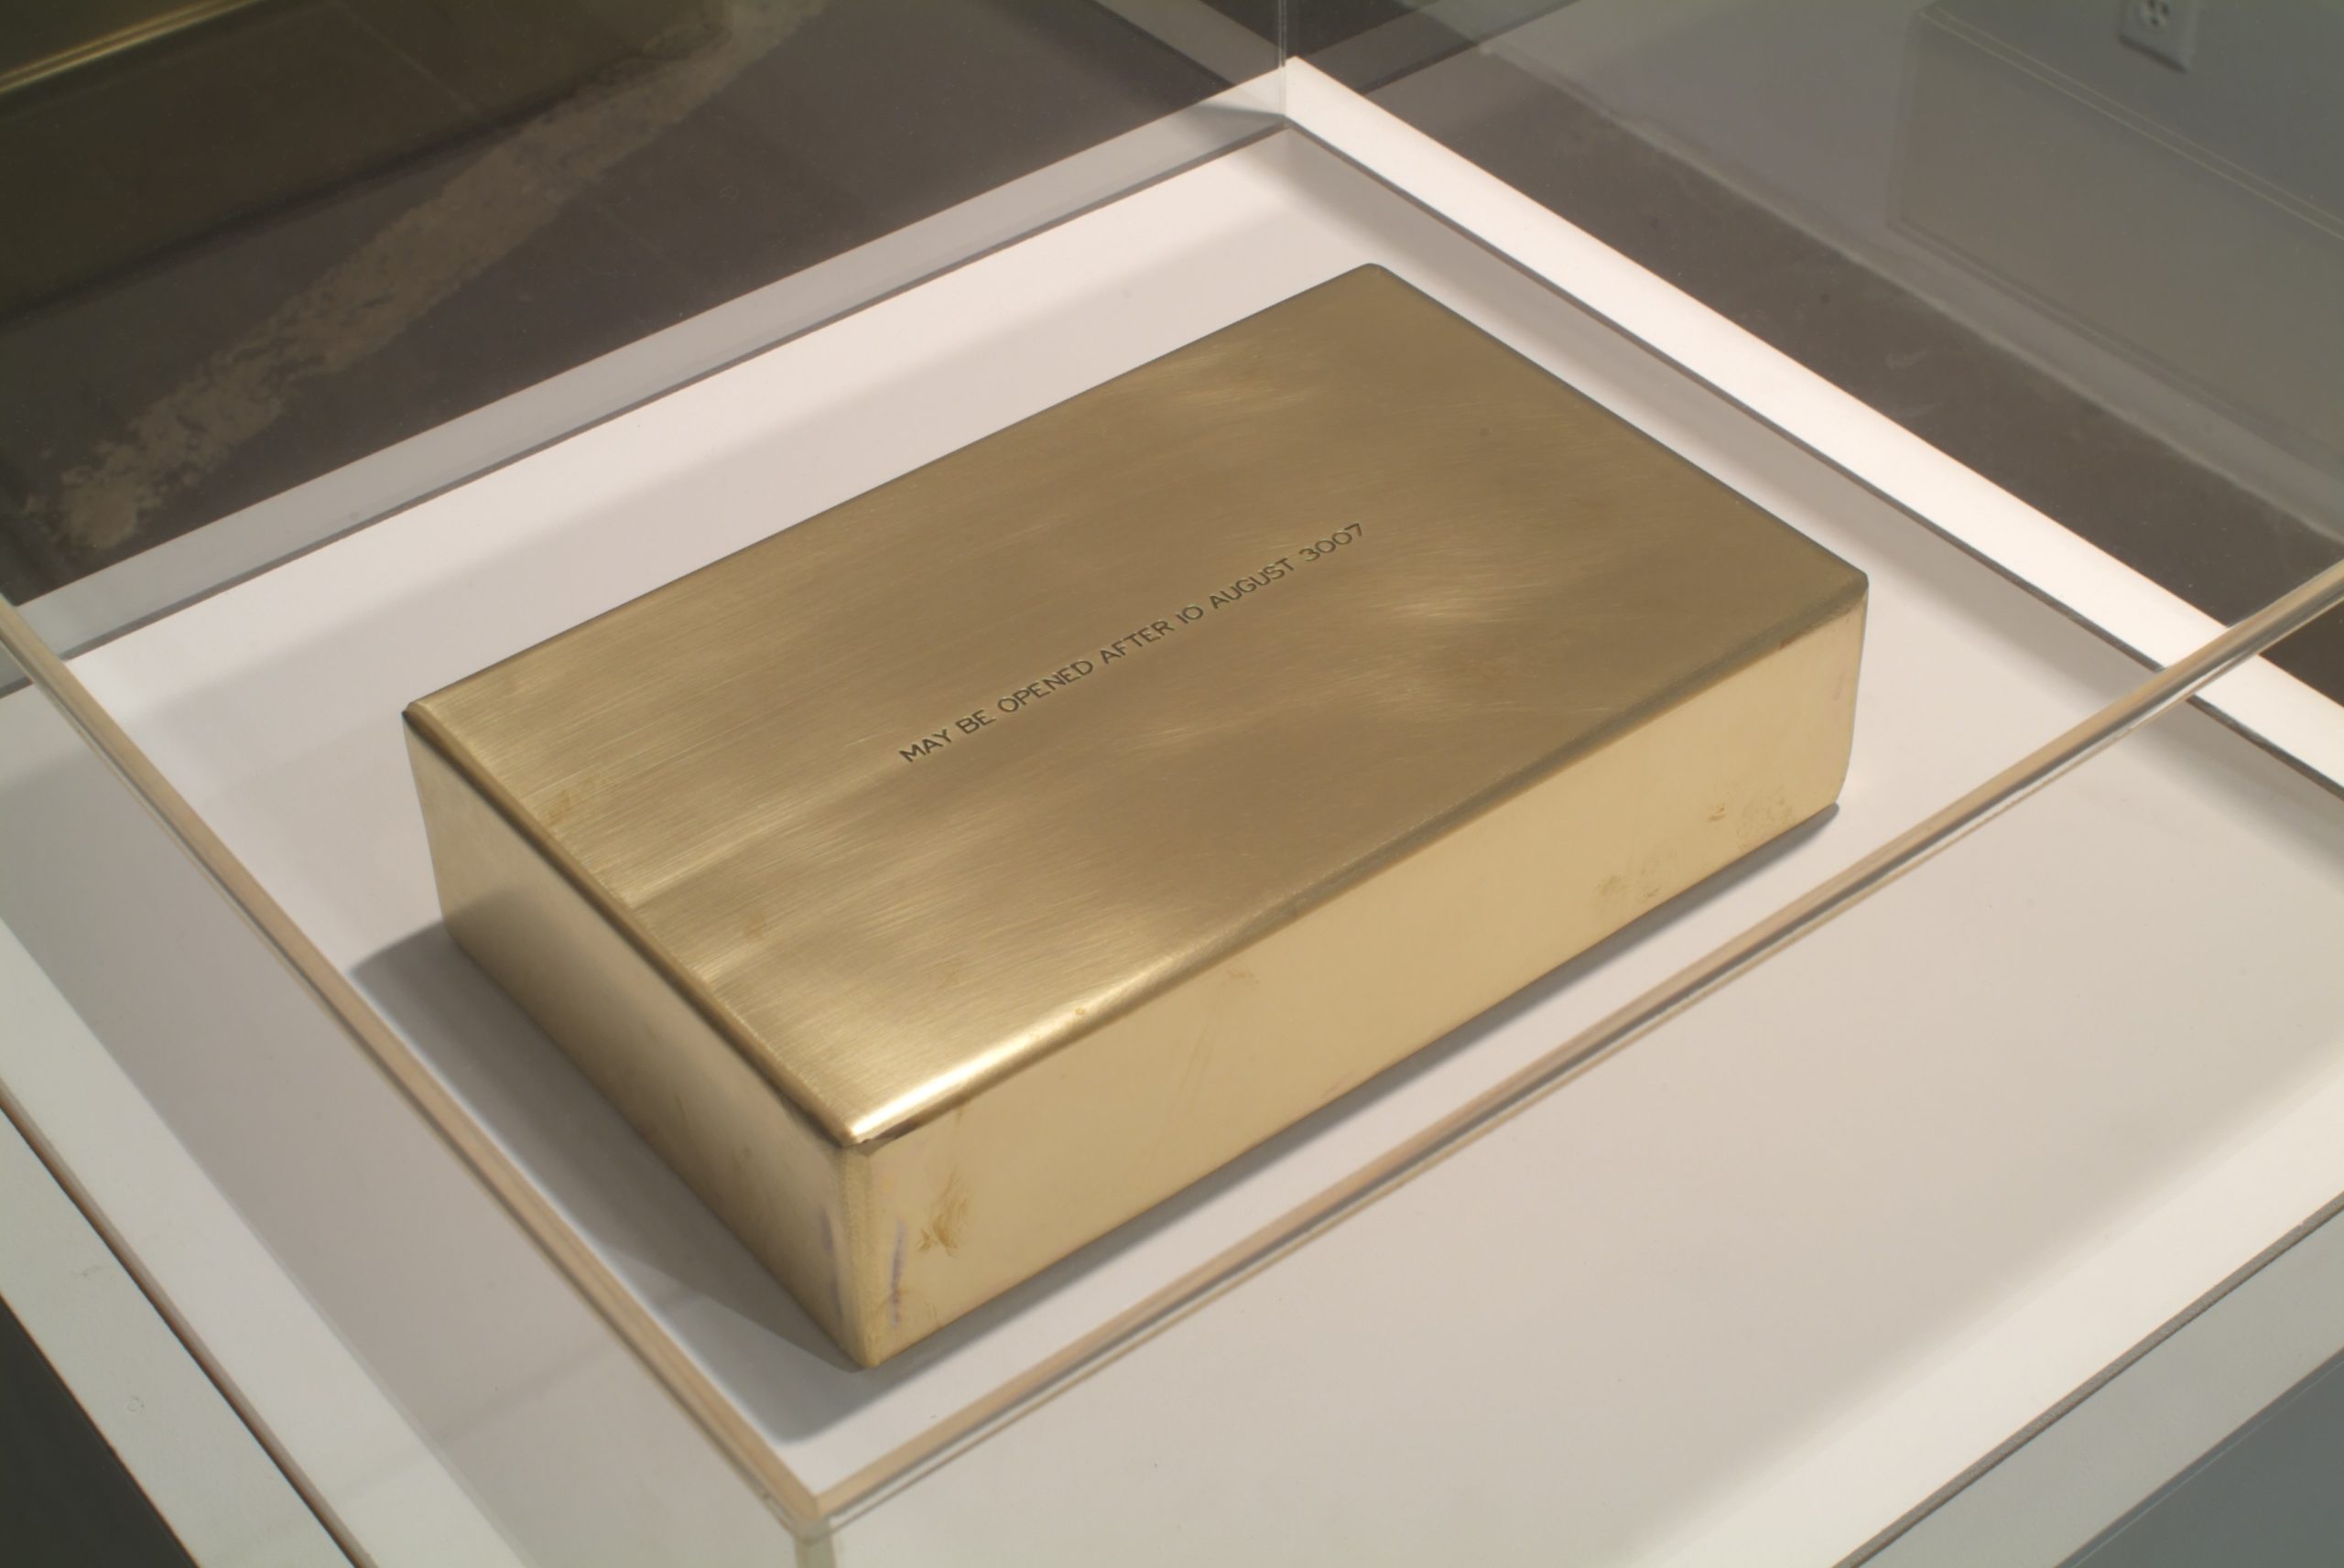 Time Capsule (For 10 August 3007), 2007